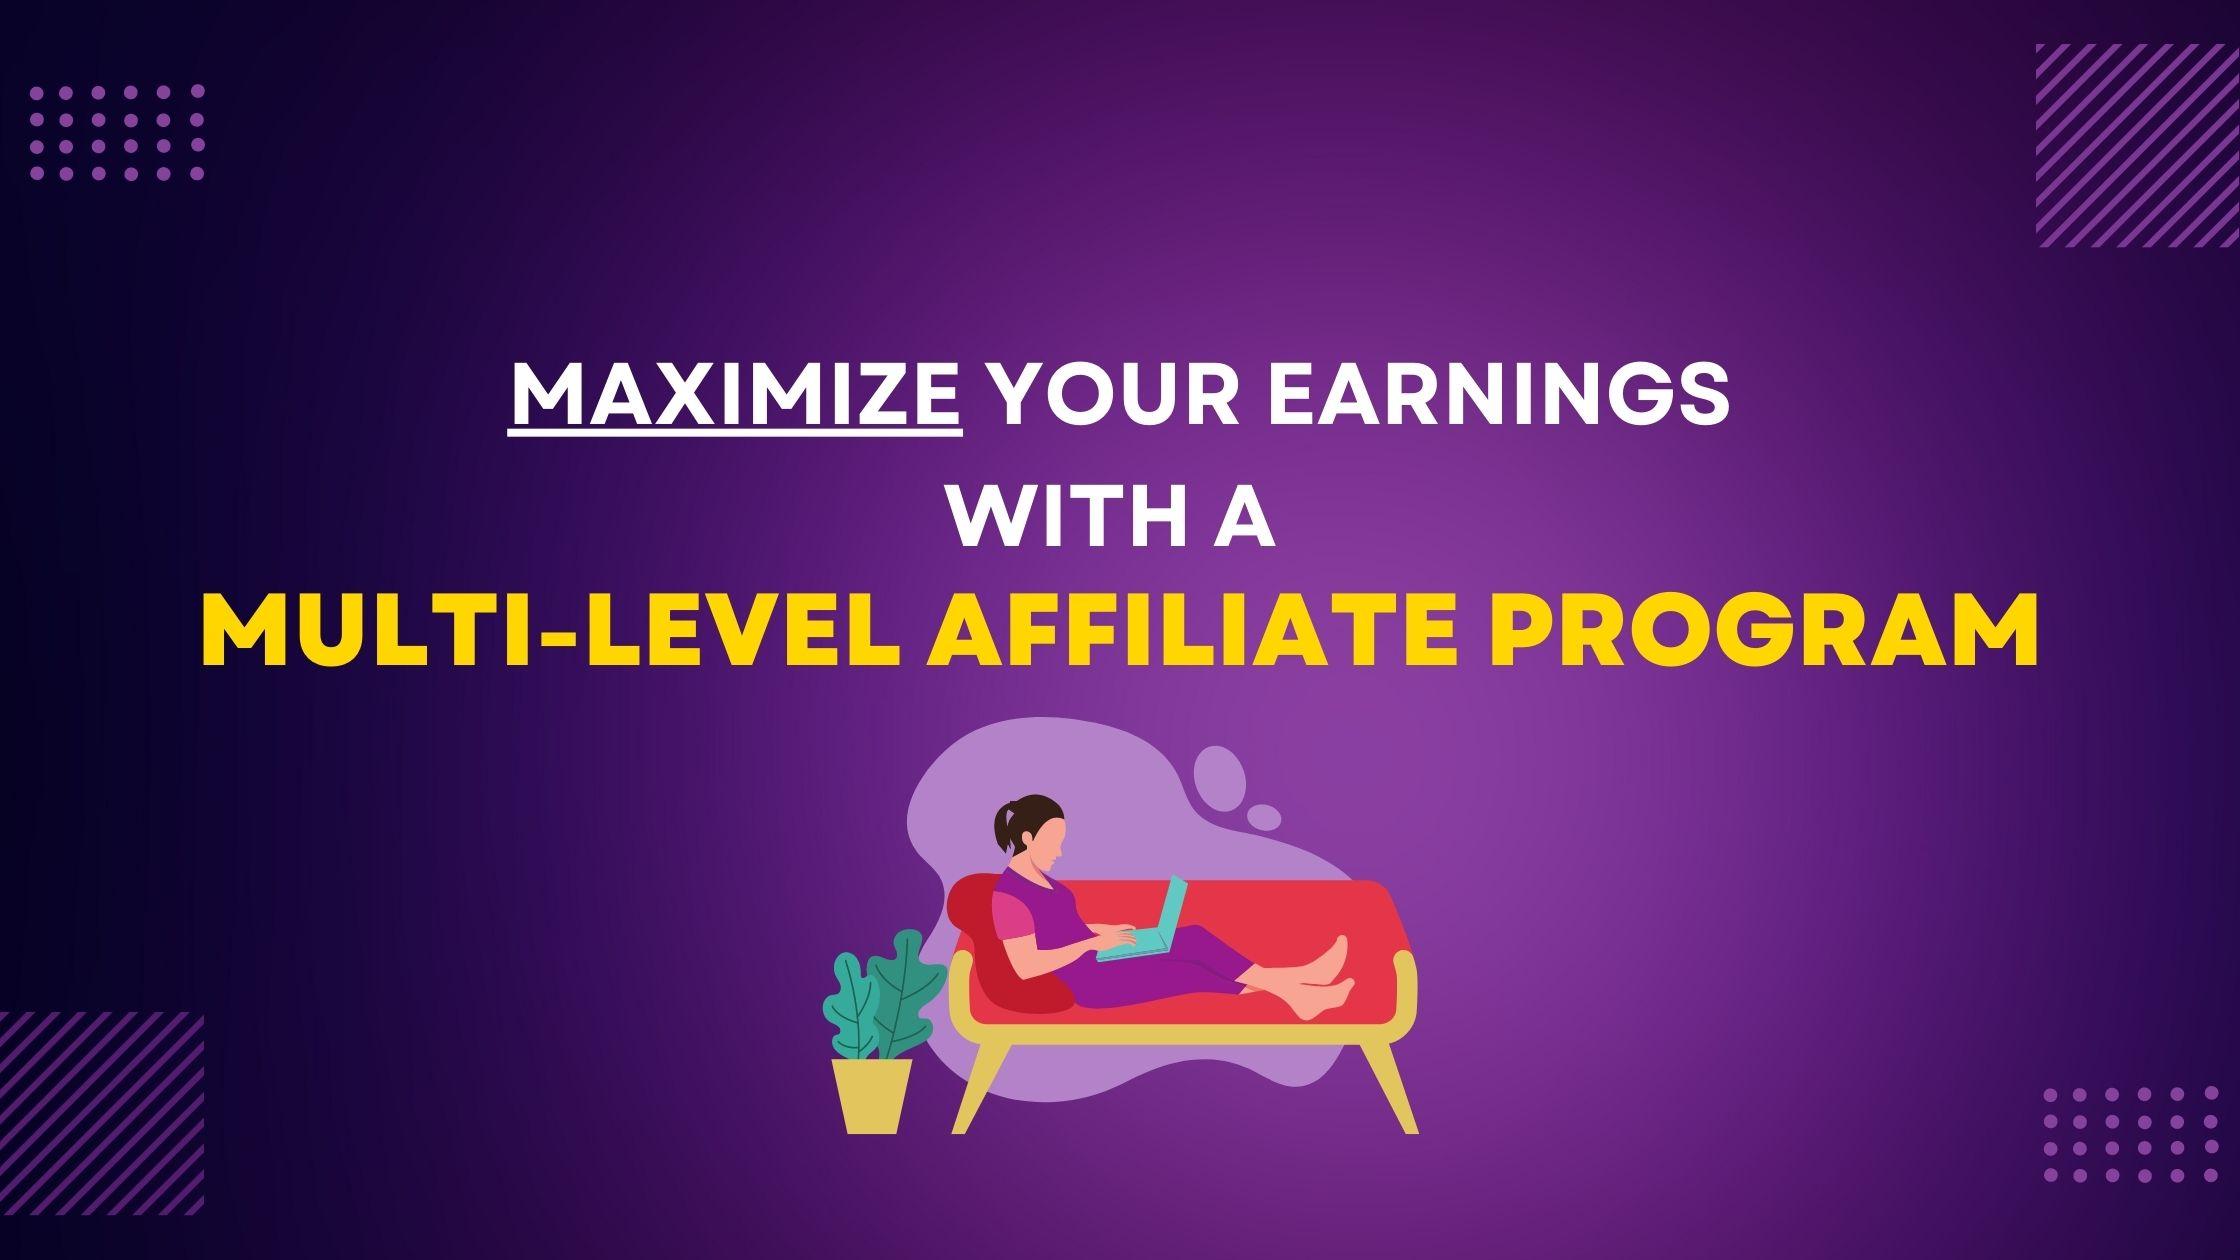 Maximize Your Earnings with a Multi-Level Affiliate Program 